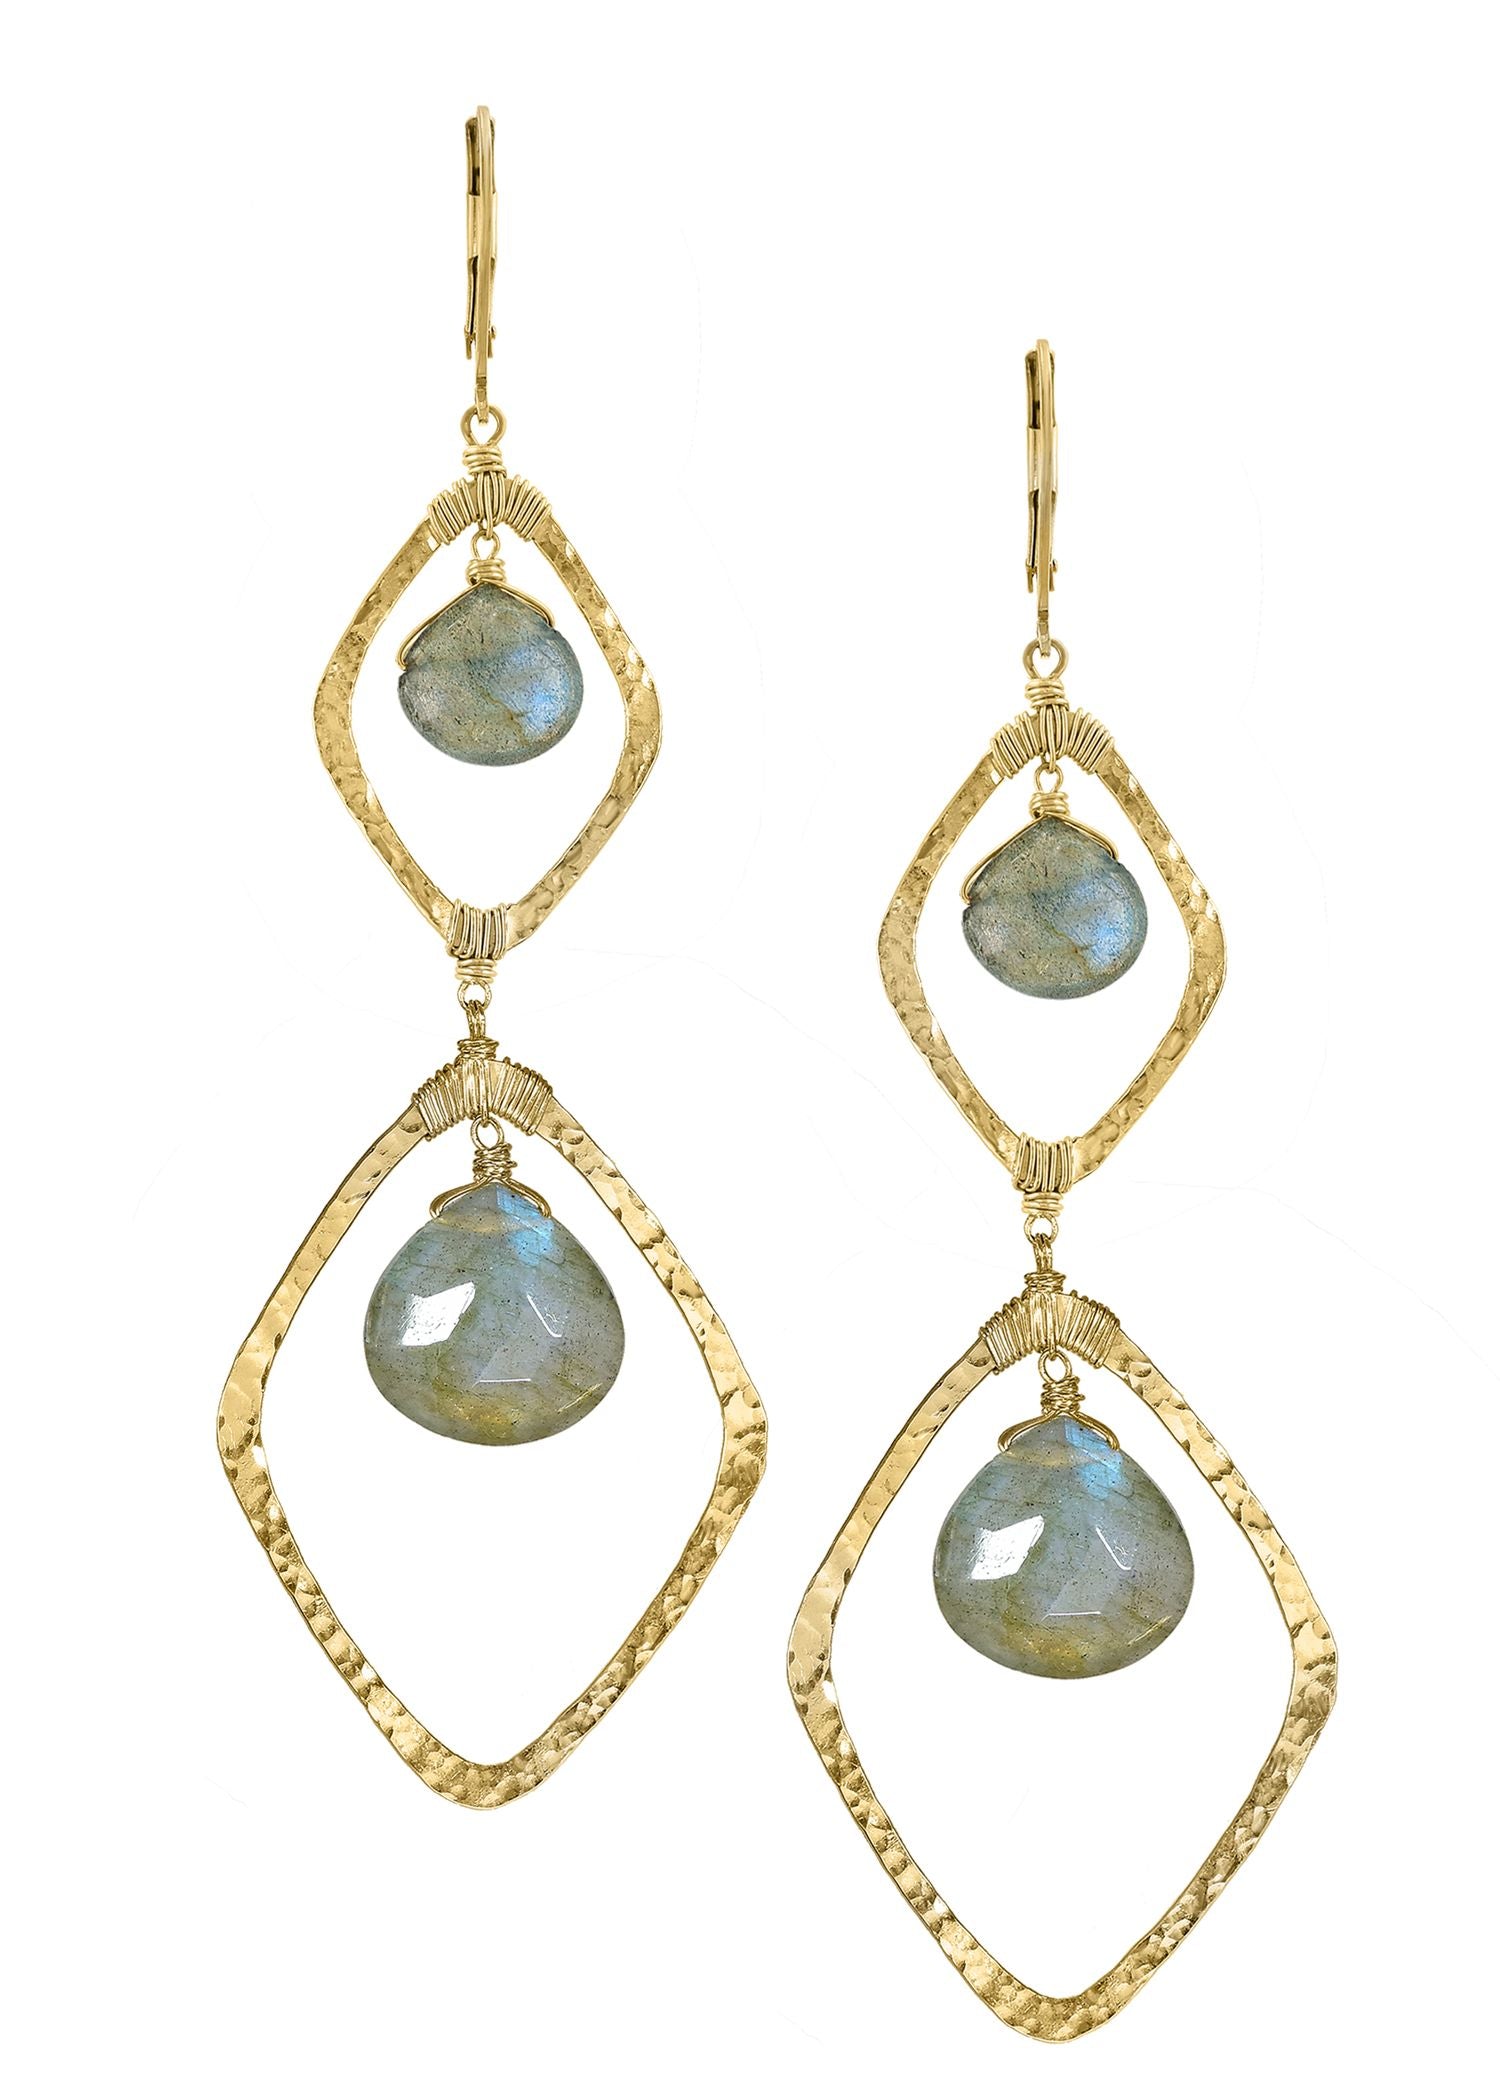 Labradorite 14k gold fill Earrings measure 3-1/8" in length (including the levers) and 1" in width Handmade in our Los Angeles studio